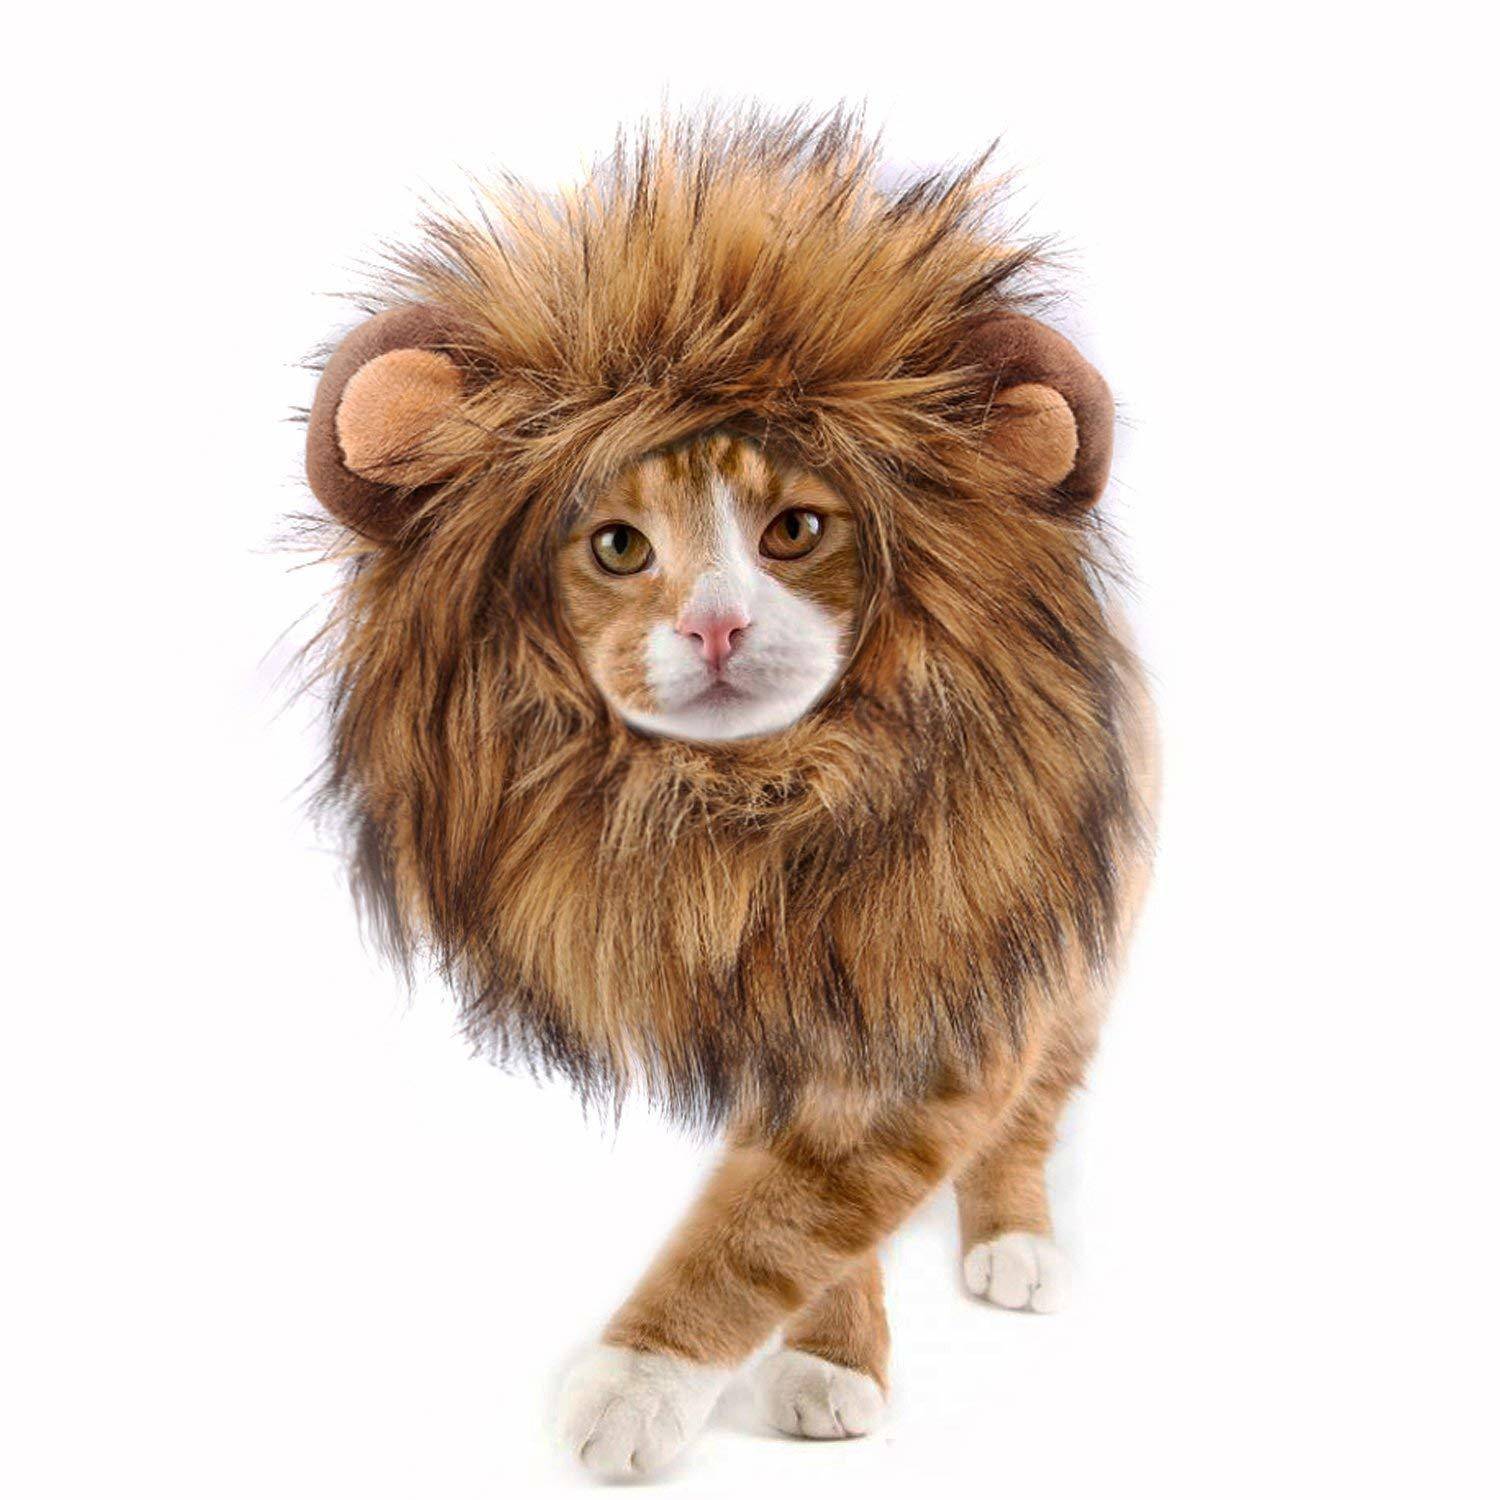 A plush animal cat that is dressed as a lion.